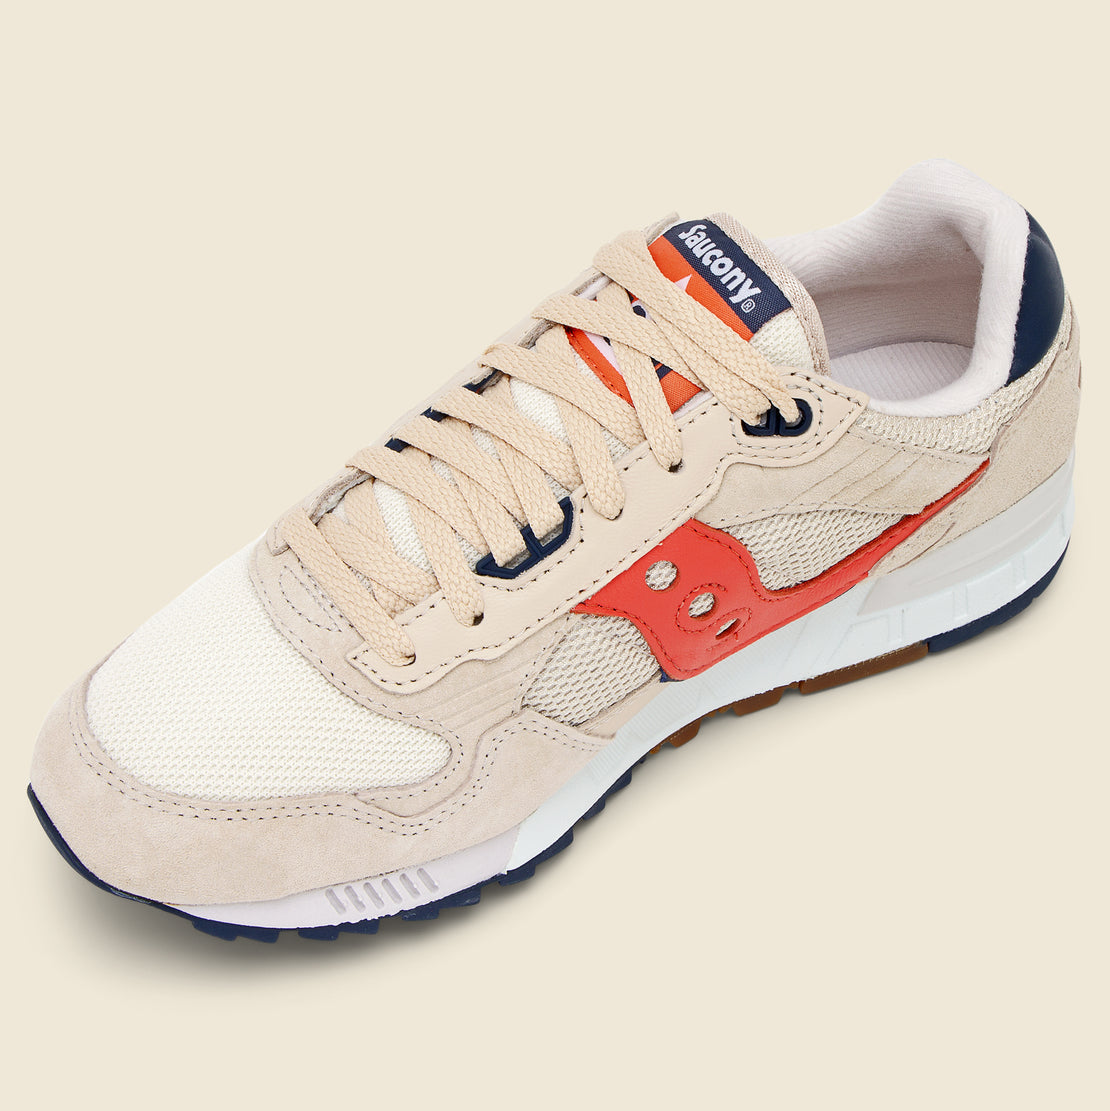 Shadow 5000 New Normal Sneaker - Sand/Orange/Navy - Saucony - STAG Provisions - Shoes - Athletic